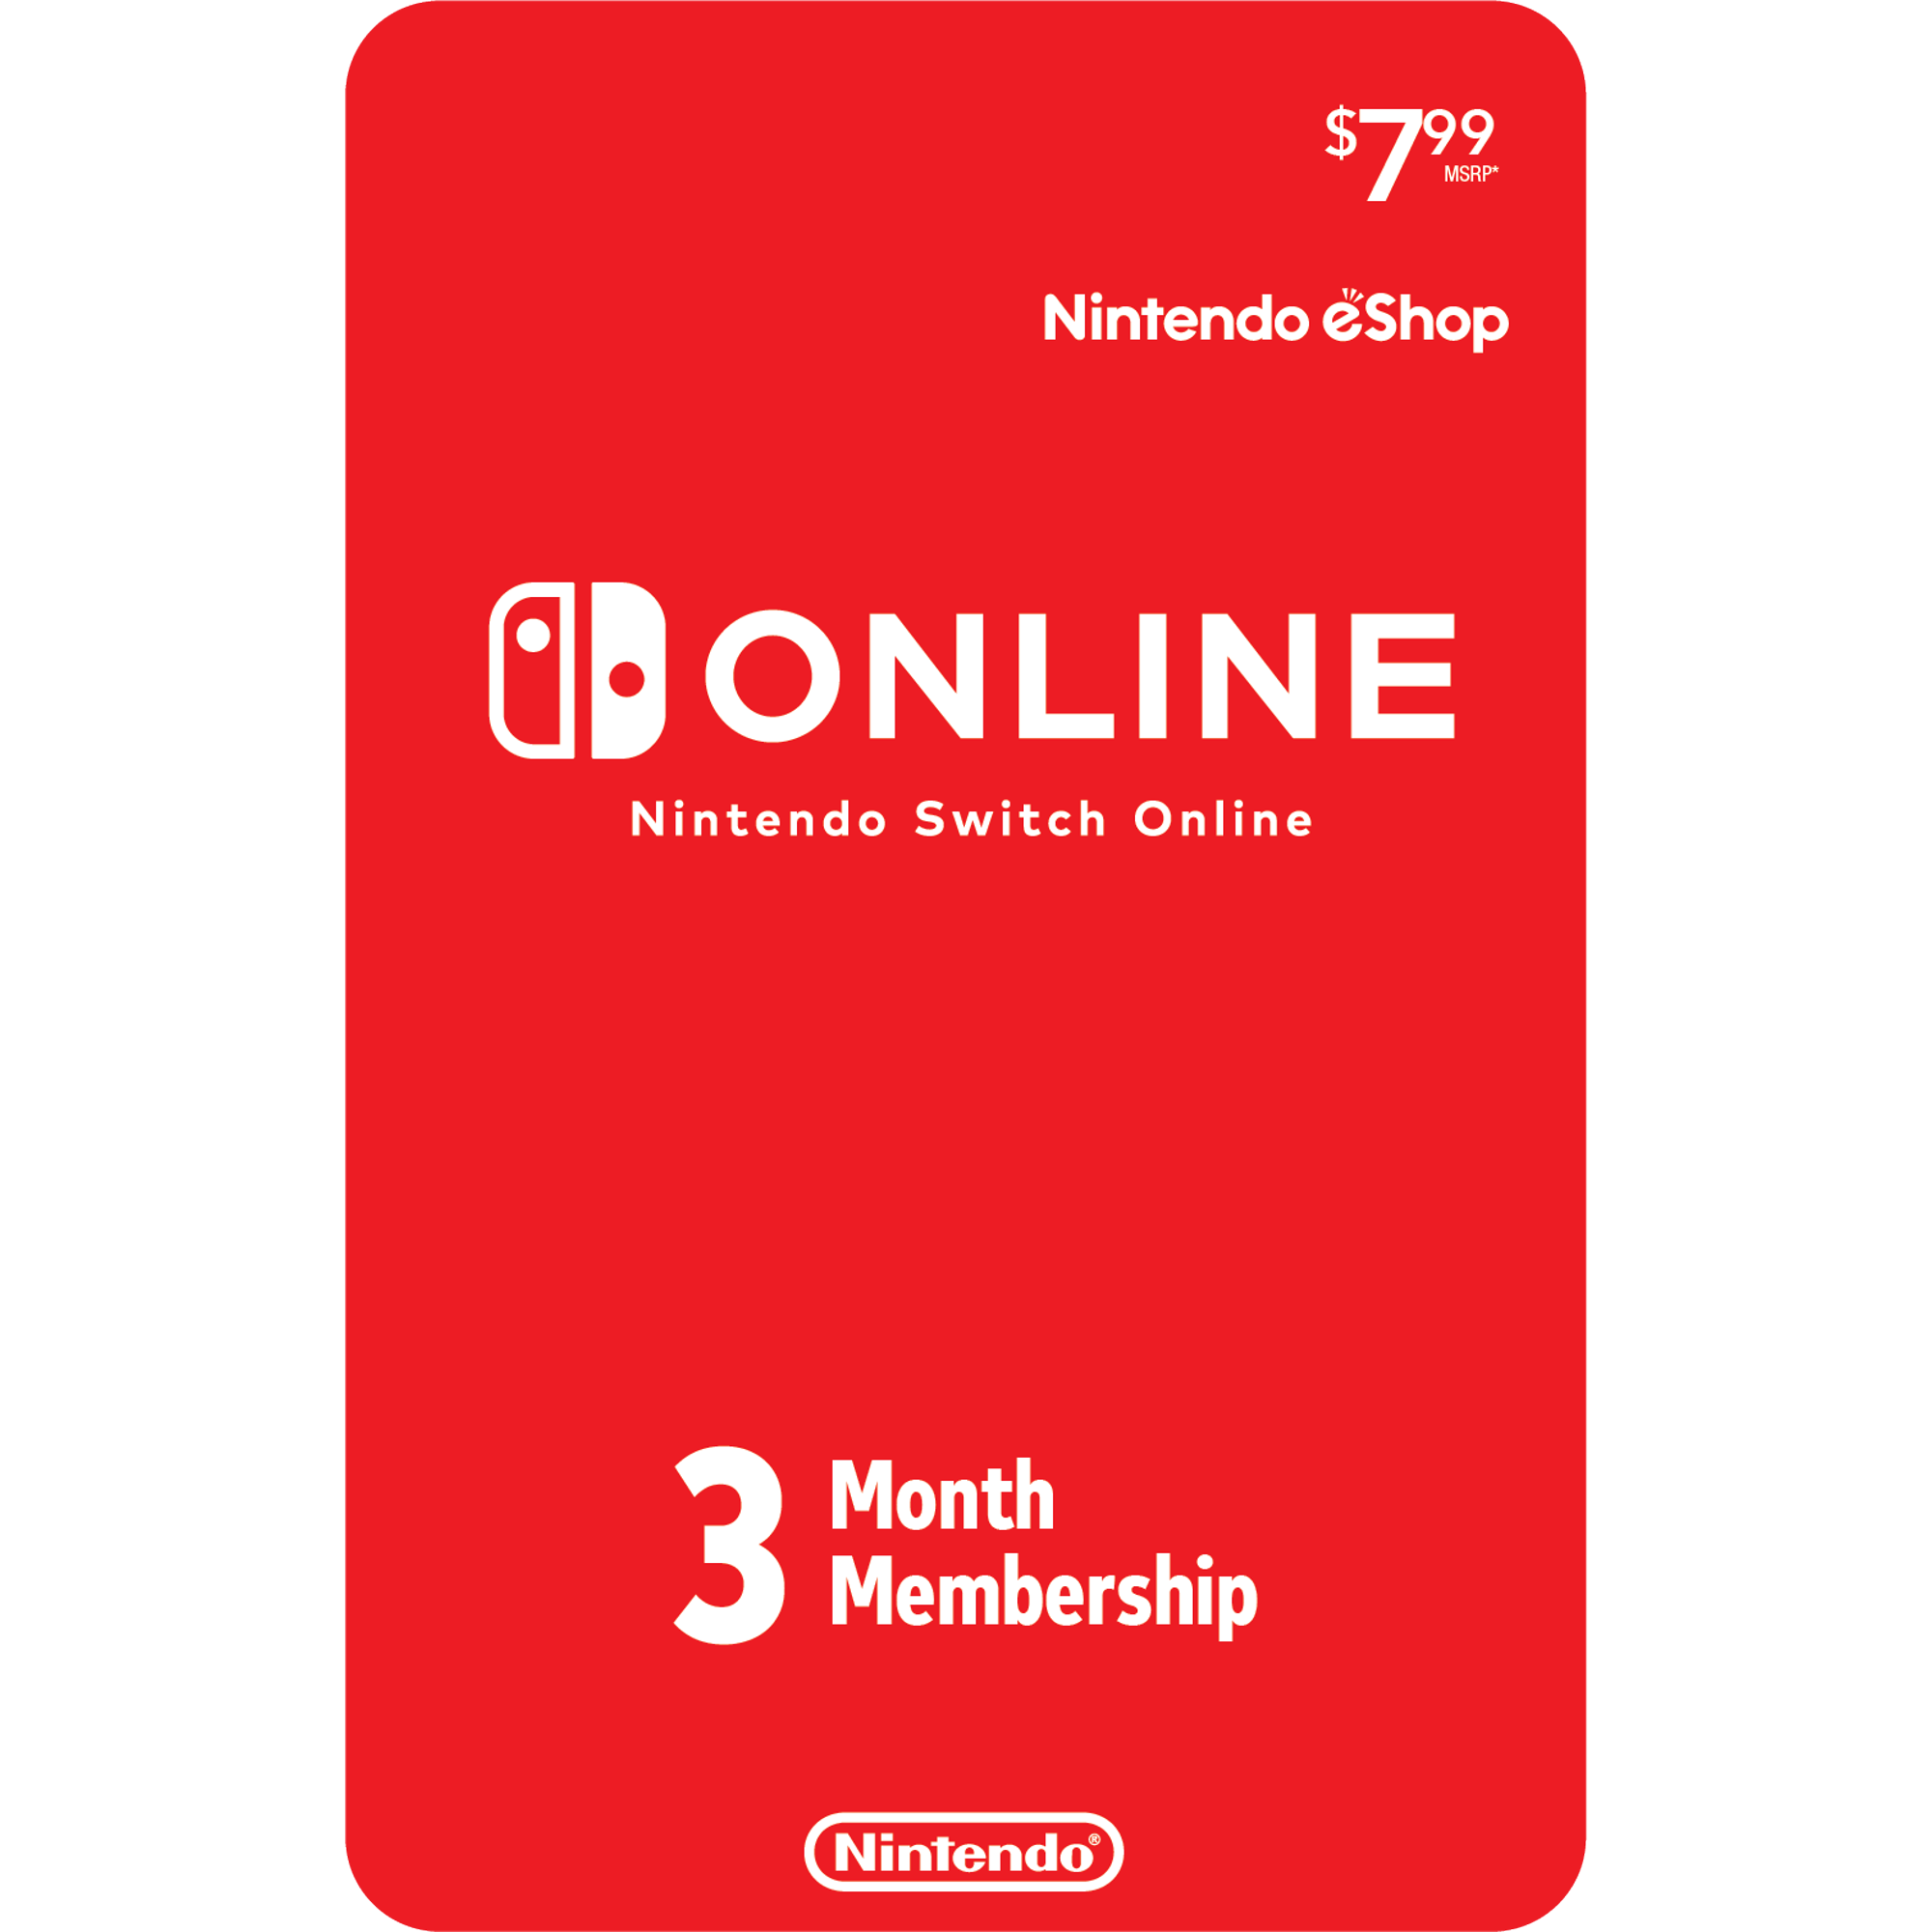 Nintendo Switch Joy-Con Neon Blue/Red Console Bundle: Mario Kart 8 Deluxe Full Game Download | 3 Months Nintendo Switch Online Membership with Mazepoly Cleaning Cloth - image 2 of 5